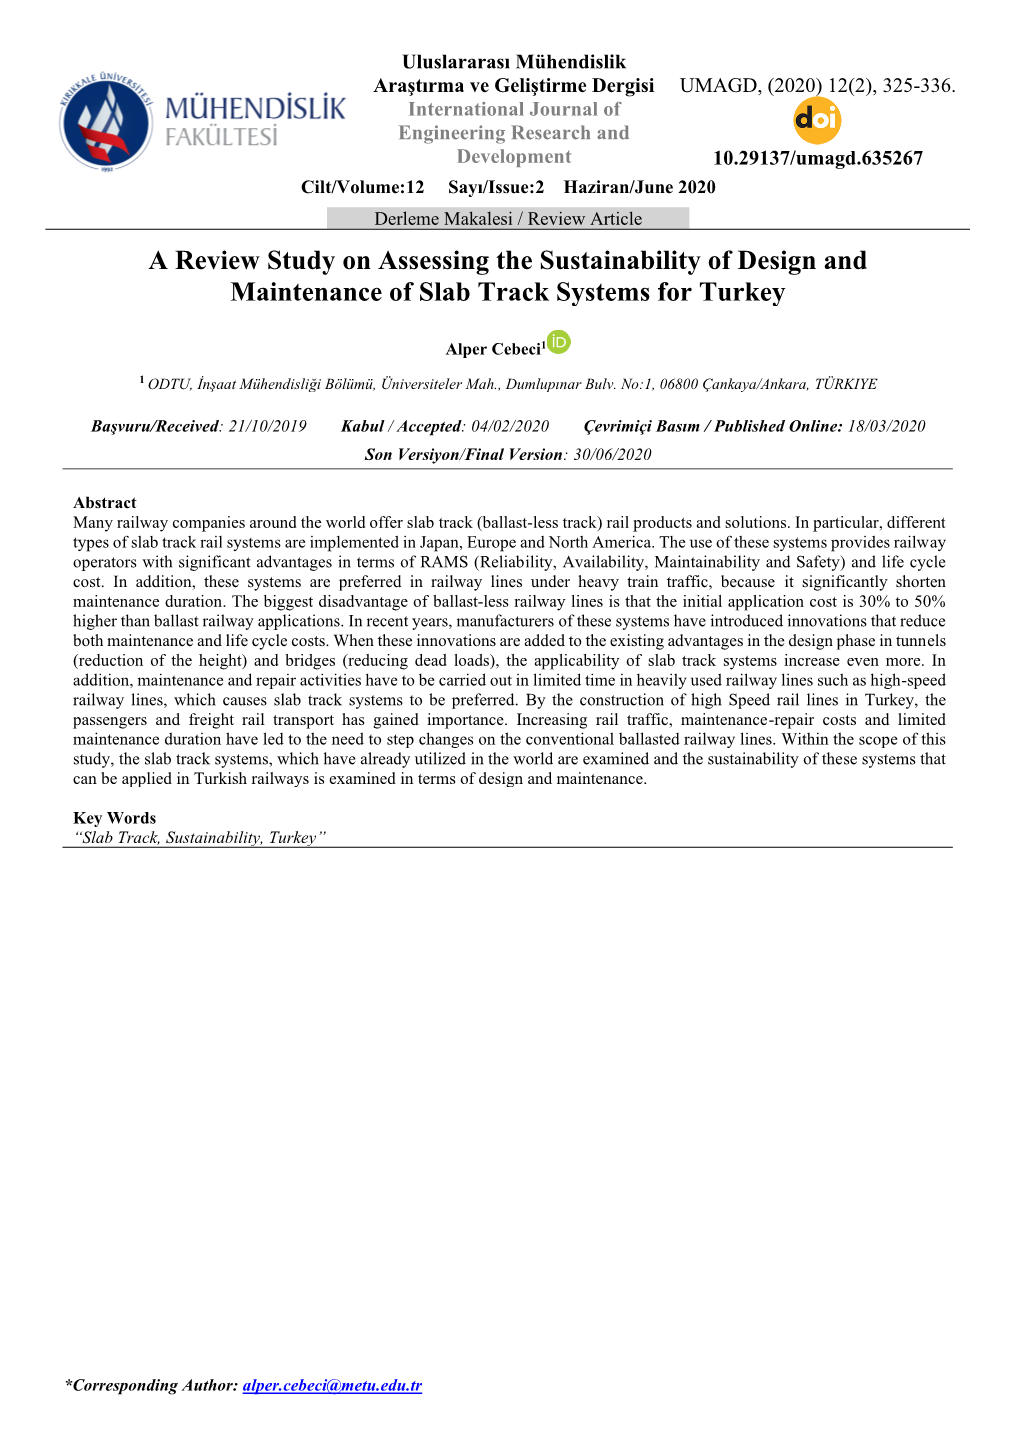 A Review Study on Assessing the Sustainability of Design and Maintenance of Slab Track Systems for Turkey